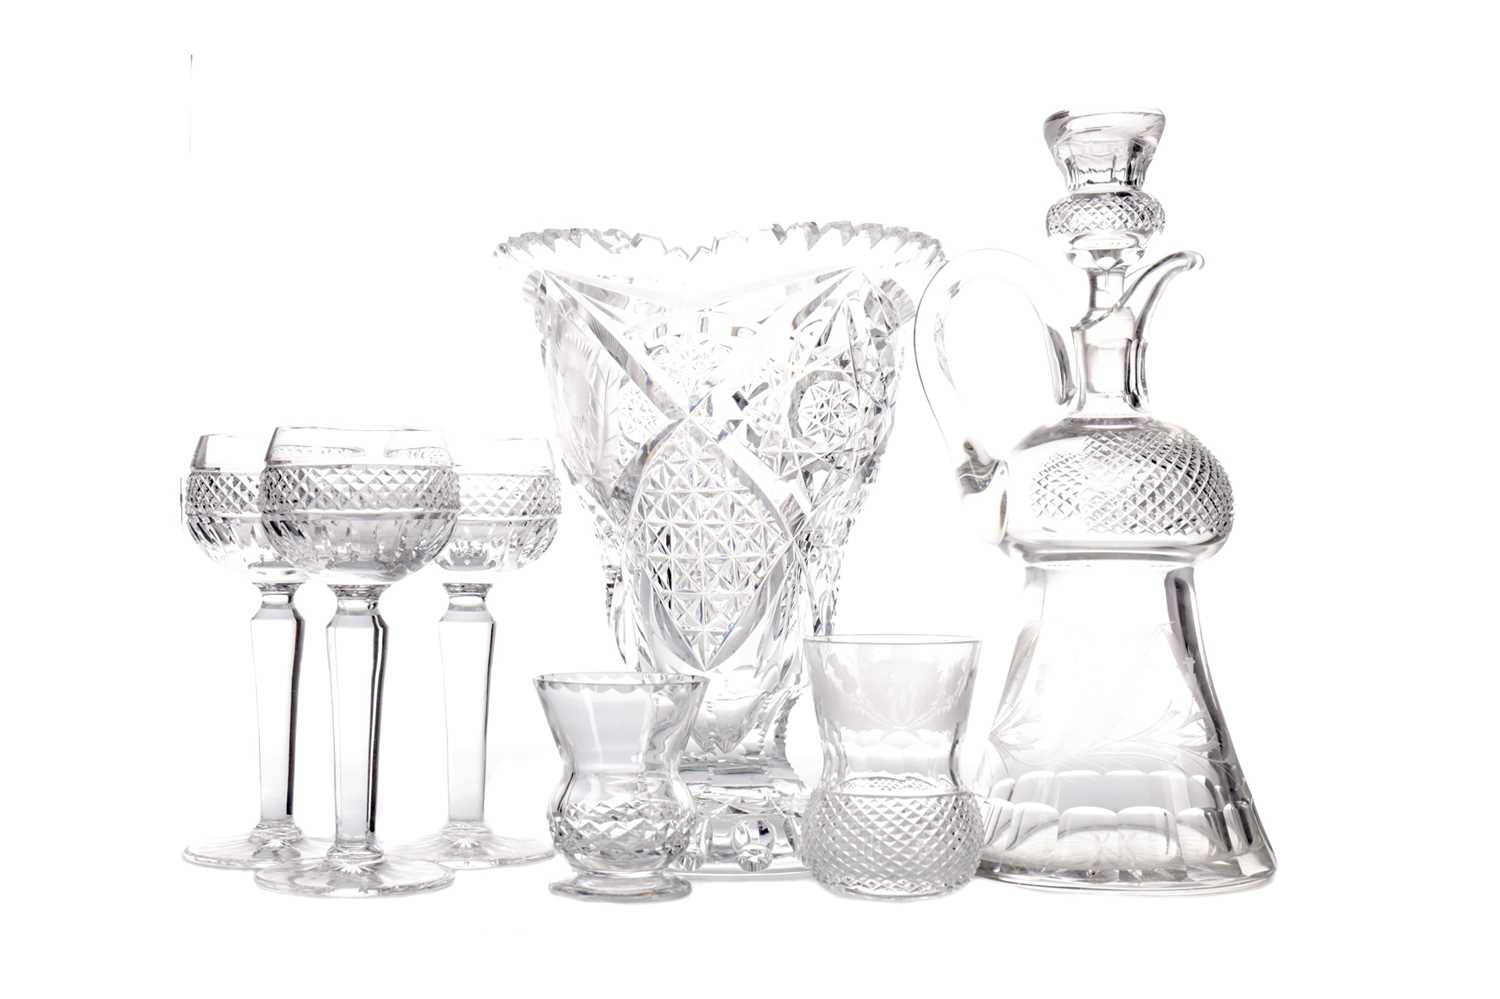 Lot 1057 - AN EARLY 20TH CENTURY CUT GLASS CLARET JUG AND STOPPER, ALONG WITH FIVE HOCK GLASSES, TWO TUMBLERS AND A VASE